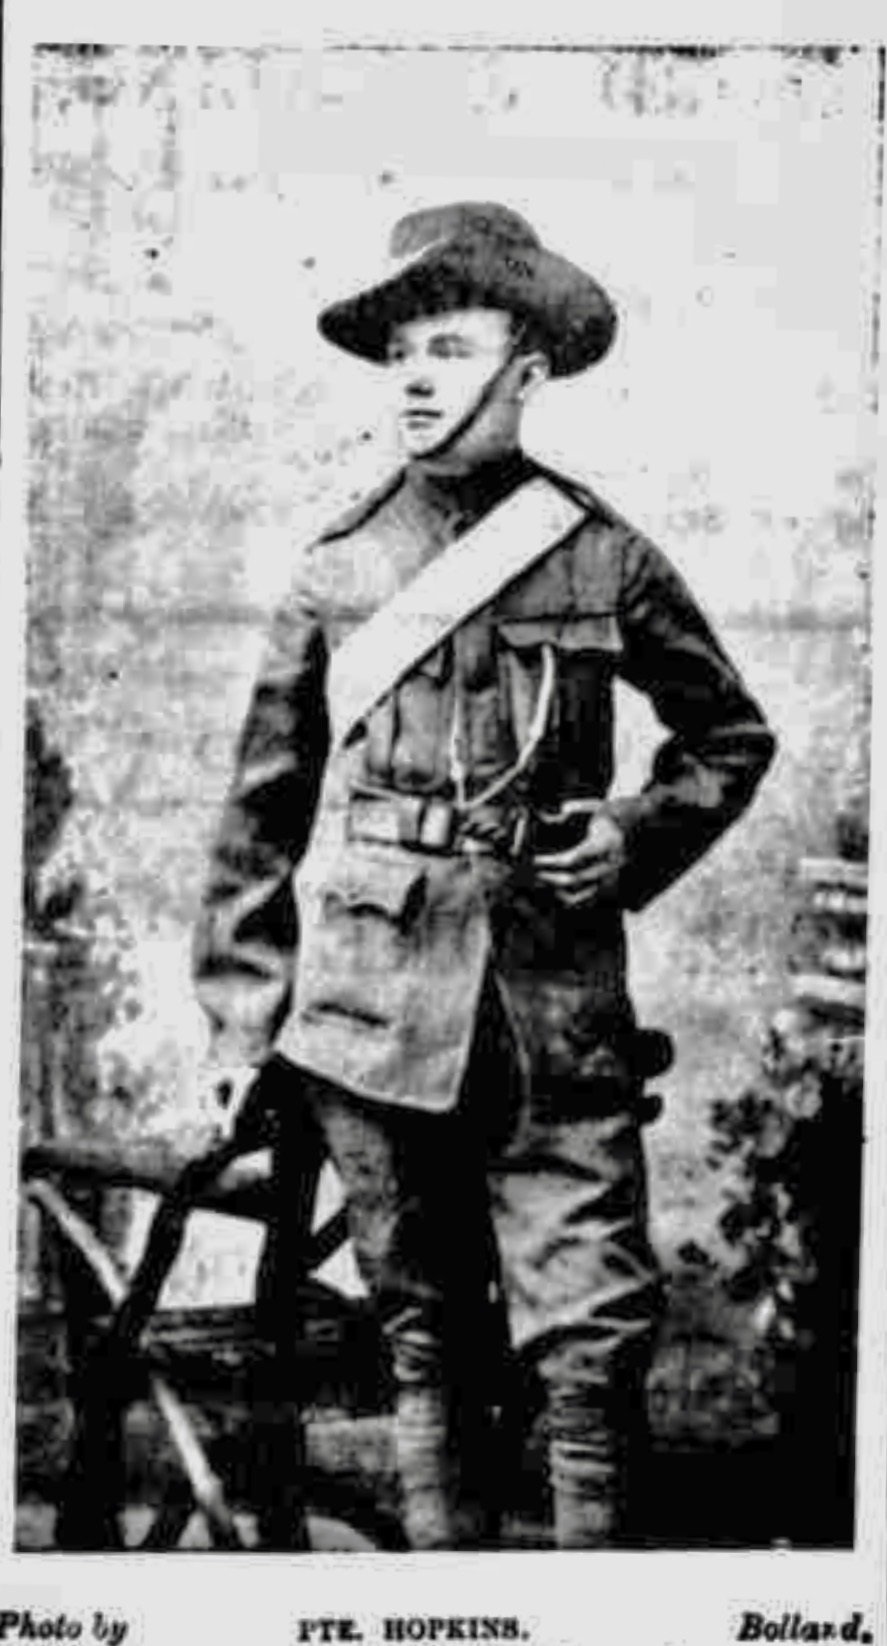 HOPKINS, Frank Mitchell. 230. Private. King's Colonials. In the uniform of the CIV in the Boer War